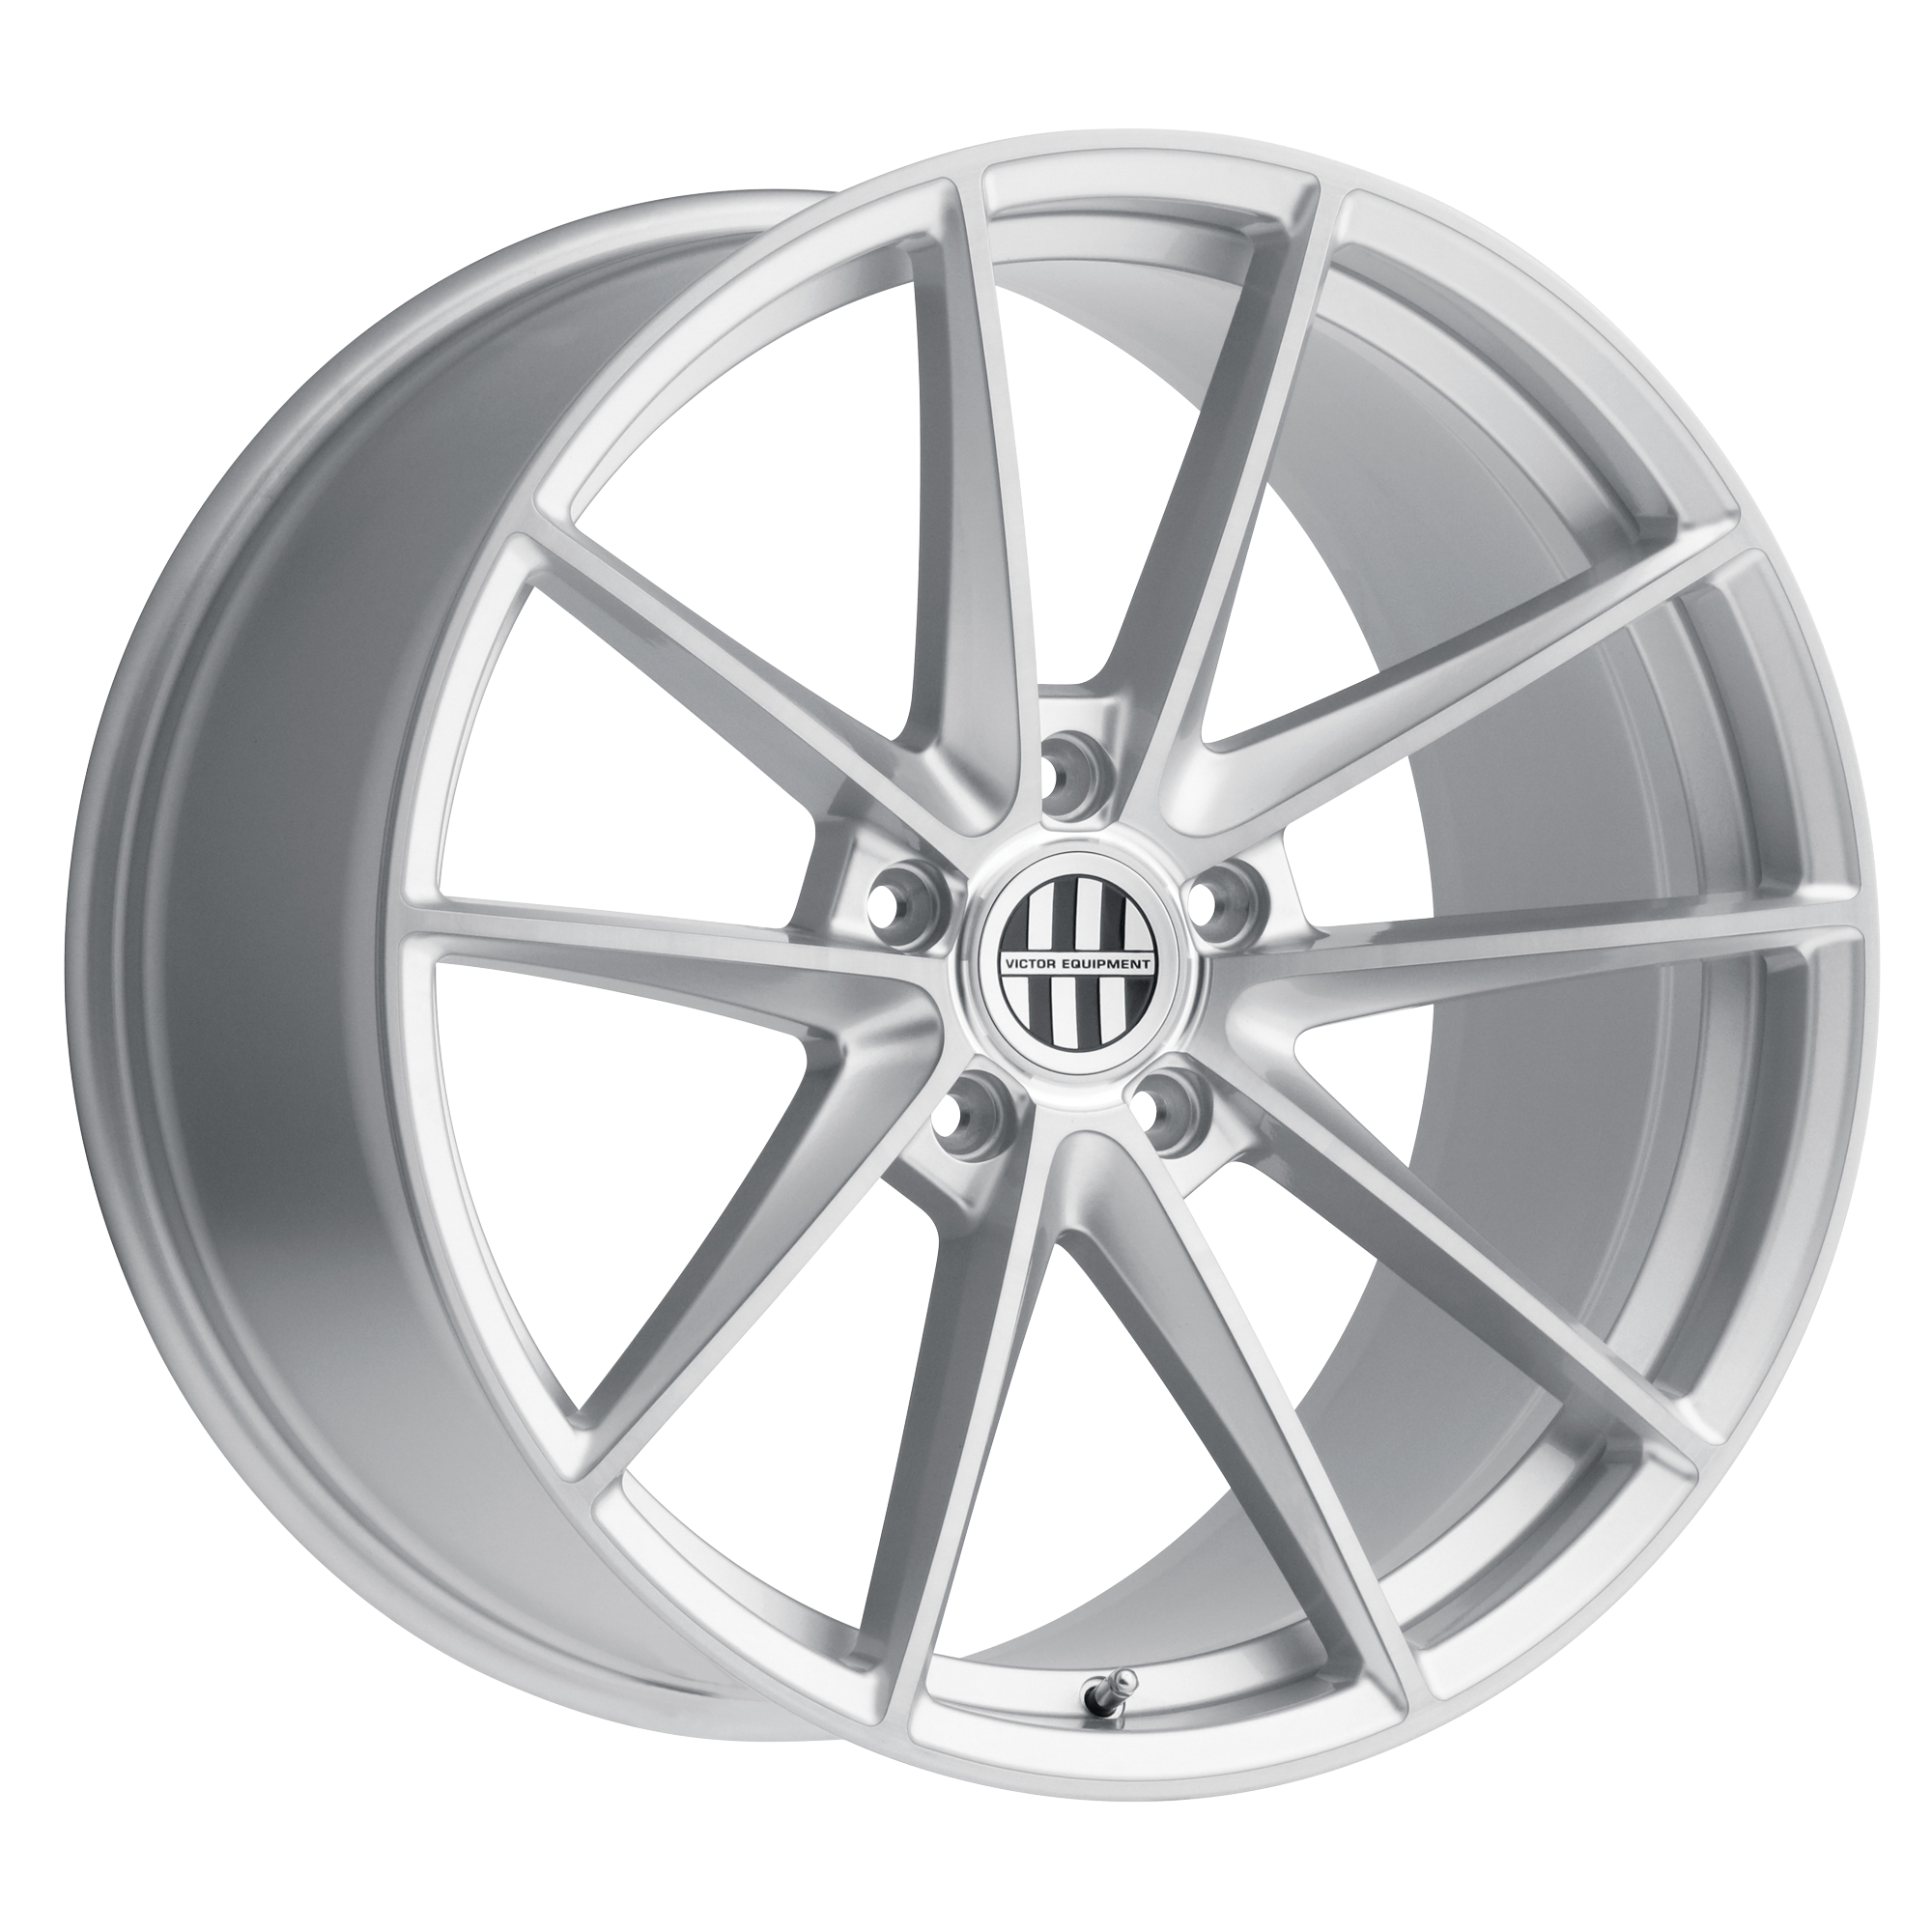 VICTOR EQUIPMENT ZUFFEN SILVER W/ BRUSHED FACE WHEELS | 18X8.5 | 5X130 | OFFSET: 45MM | CB: 71.5MM